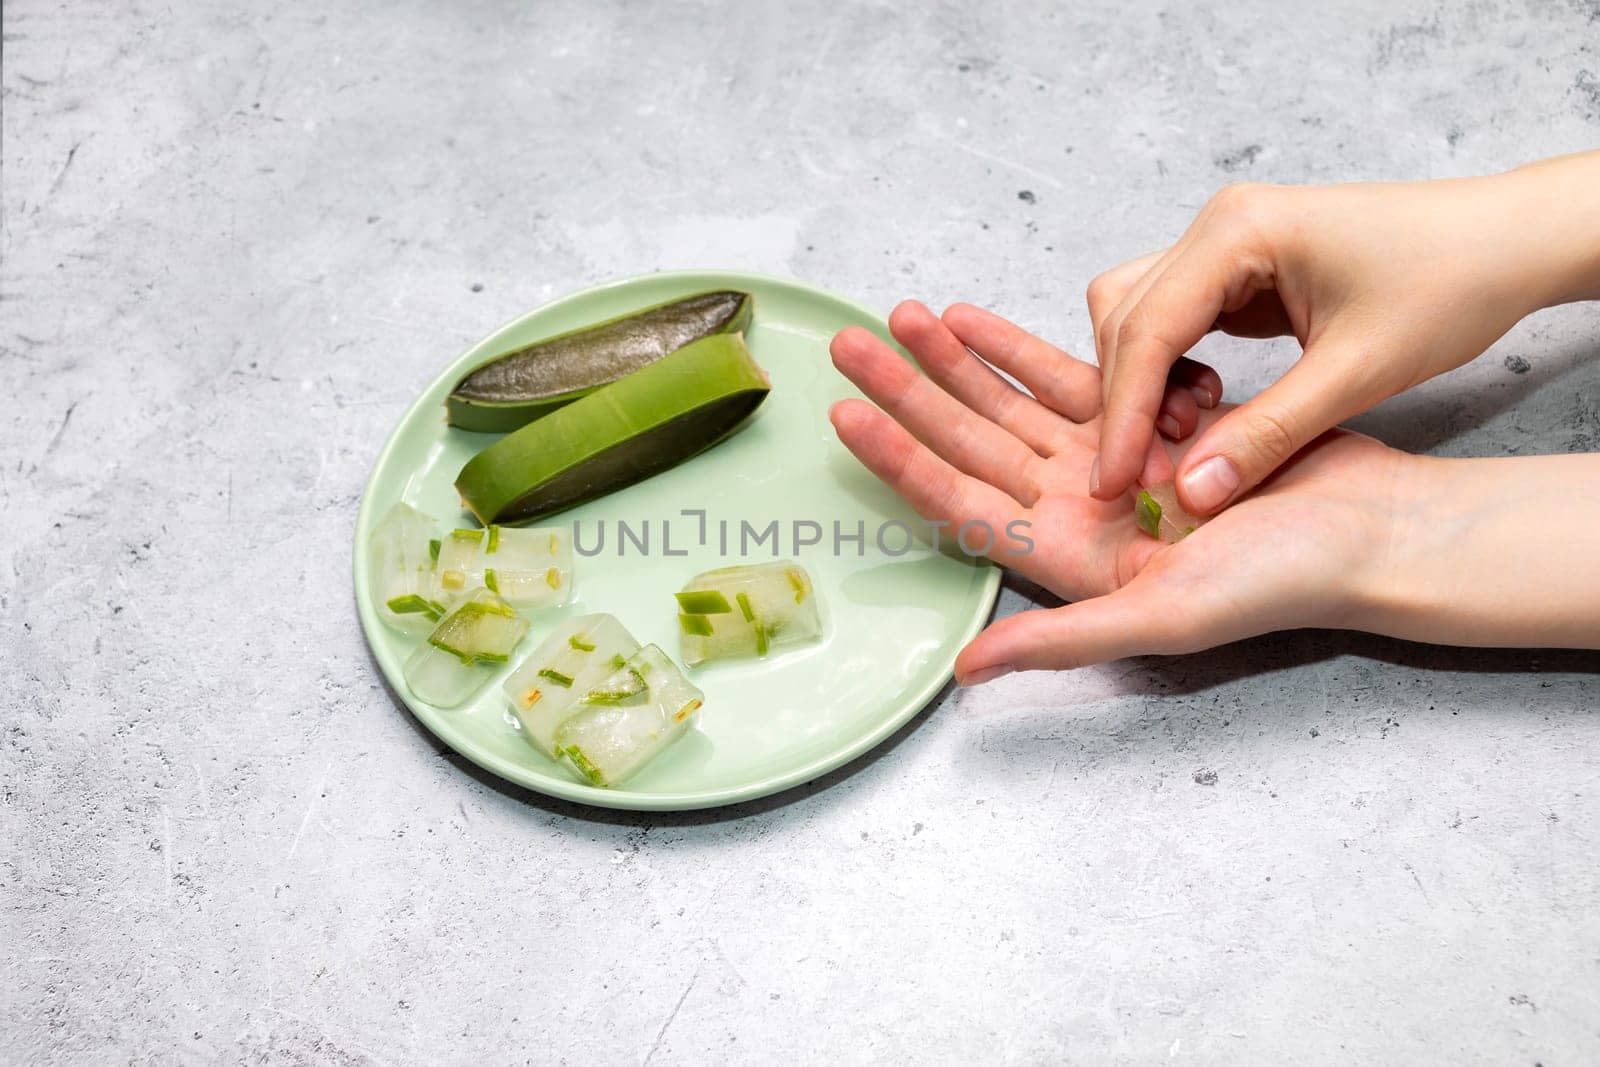 Top View Woman's Hand Holding Aloe Juice Ice Cubes, Aloe Vera Plant On Green Plate On Table. Flat Lay Horizontal plane. Natural Homemade Cosmetics, DIY Concept. Food, Medicine And Beauty Industry.